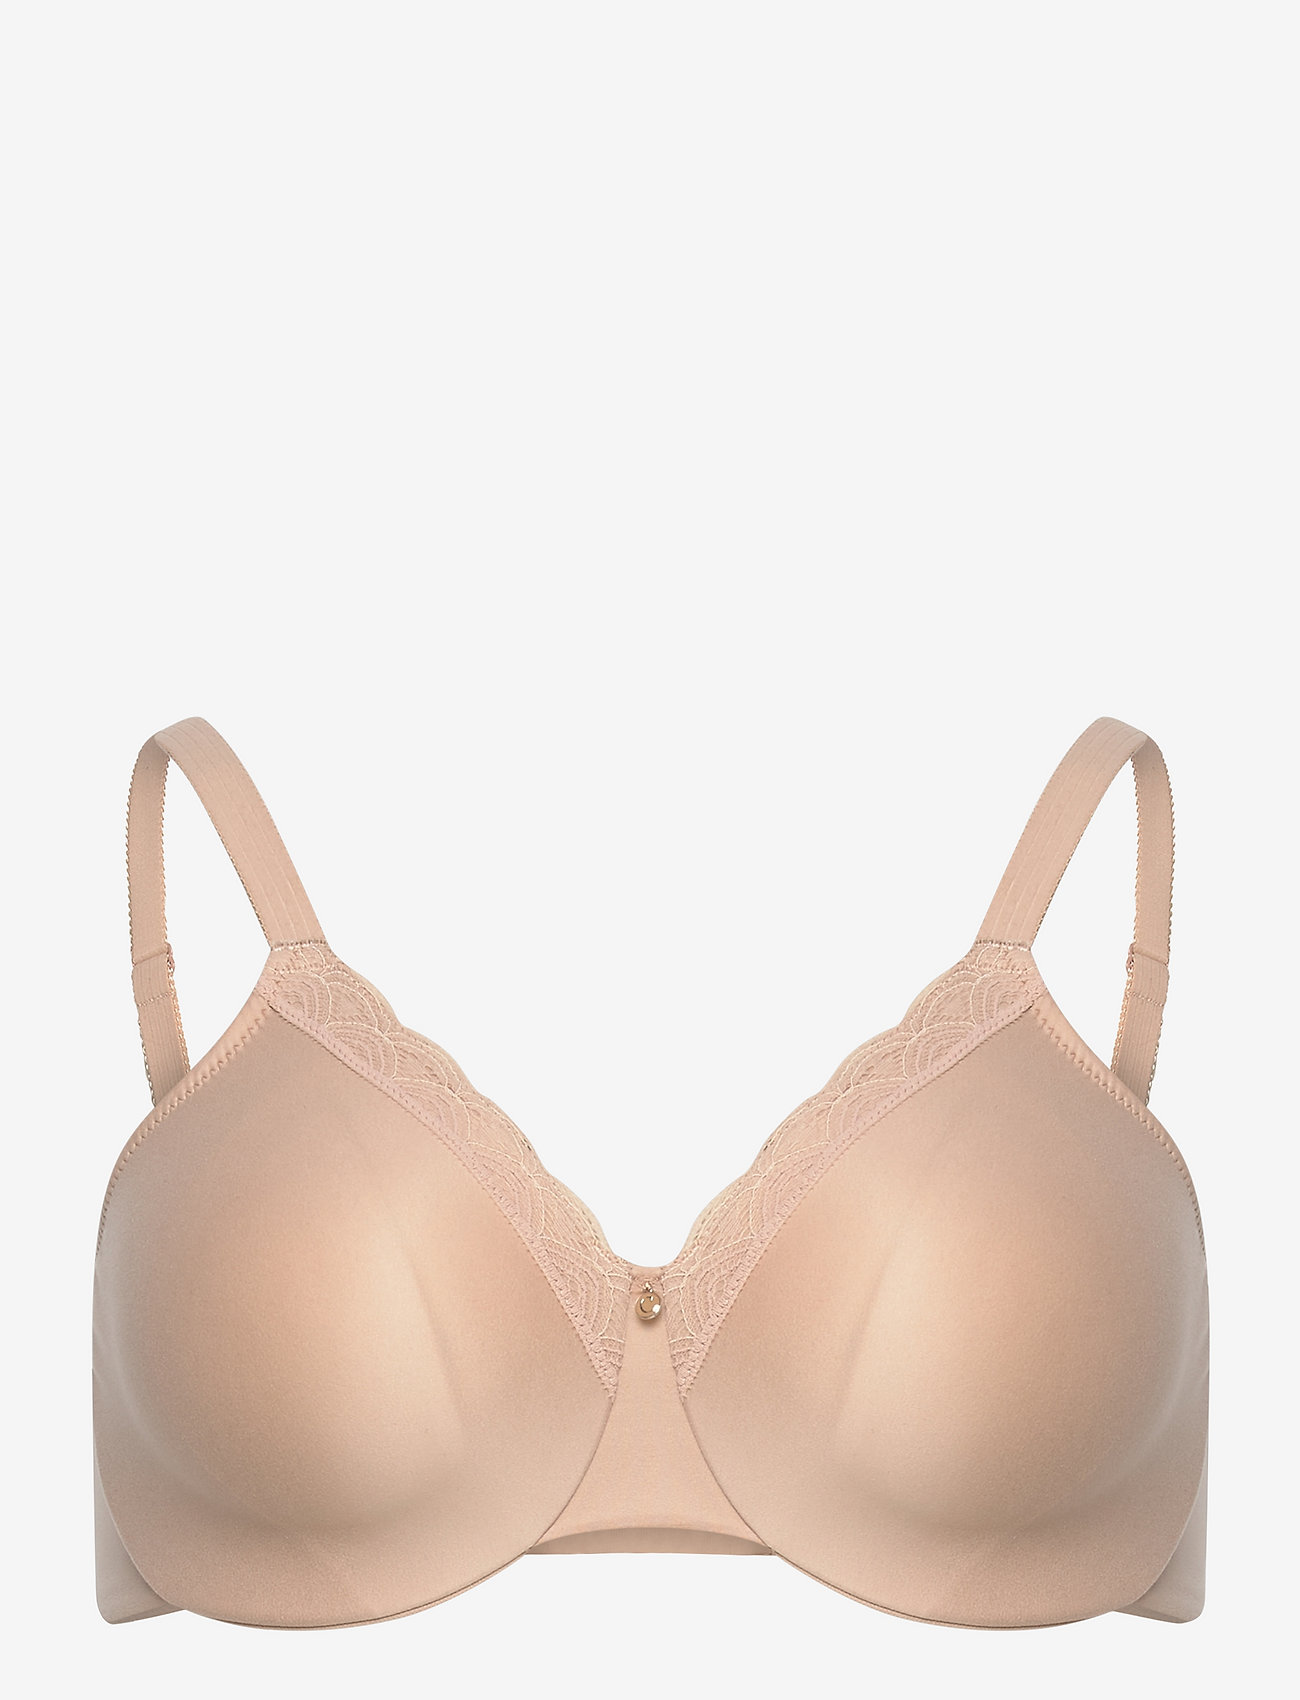 CHANTELLE - CO BRA WIRED 3 PARTIES - nude - 0